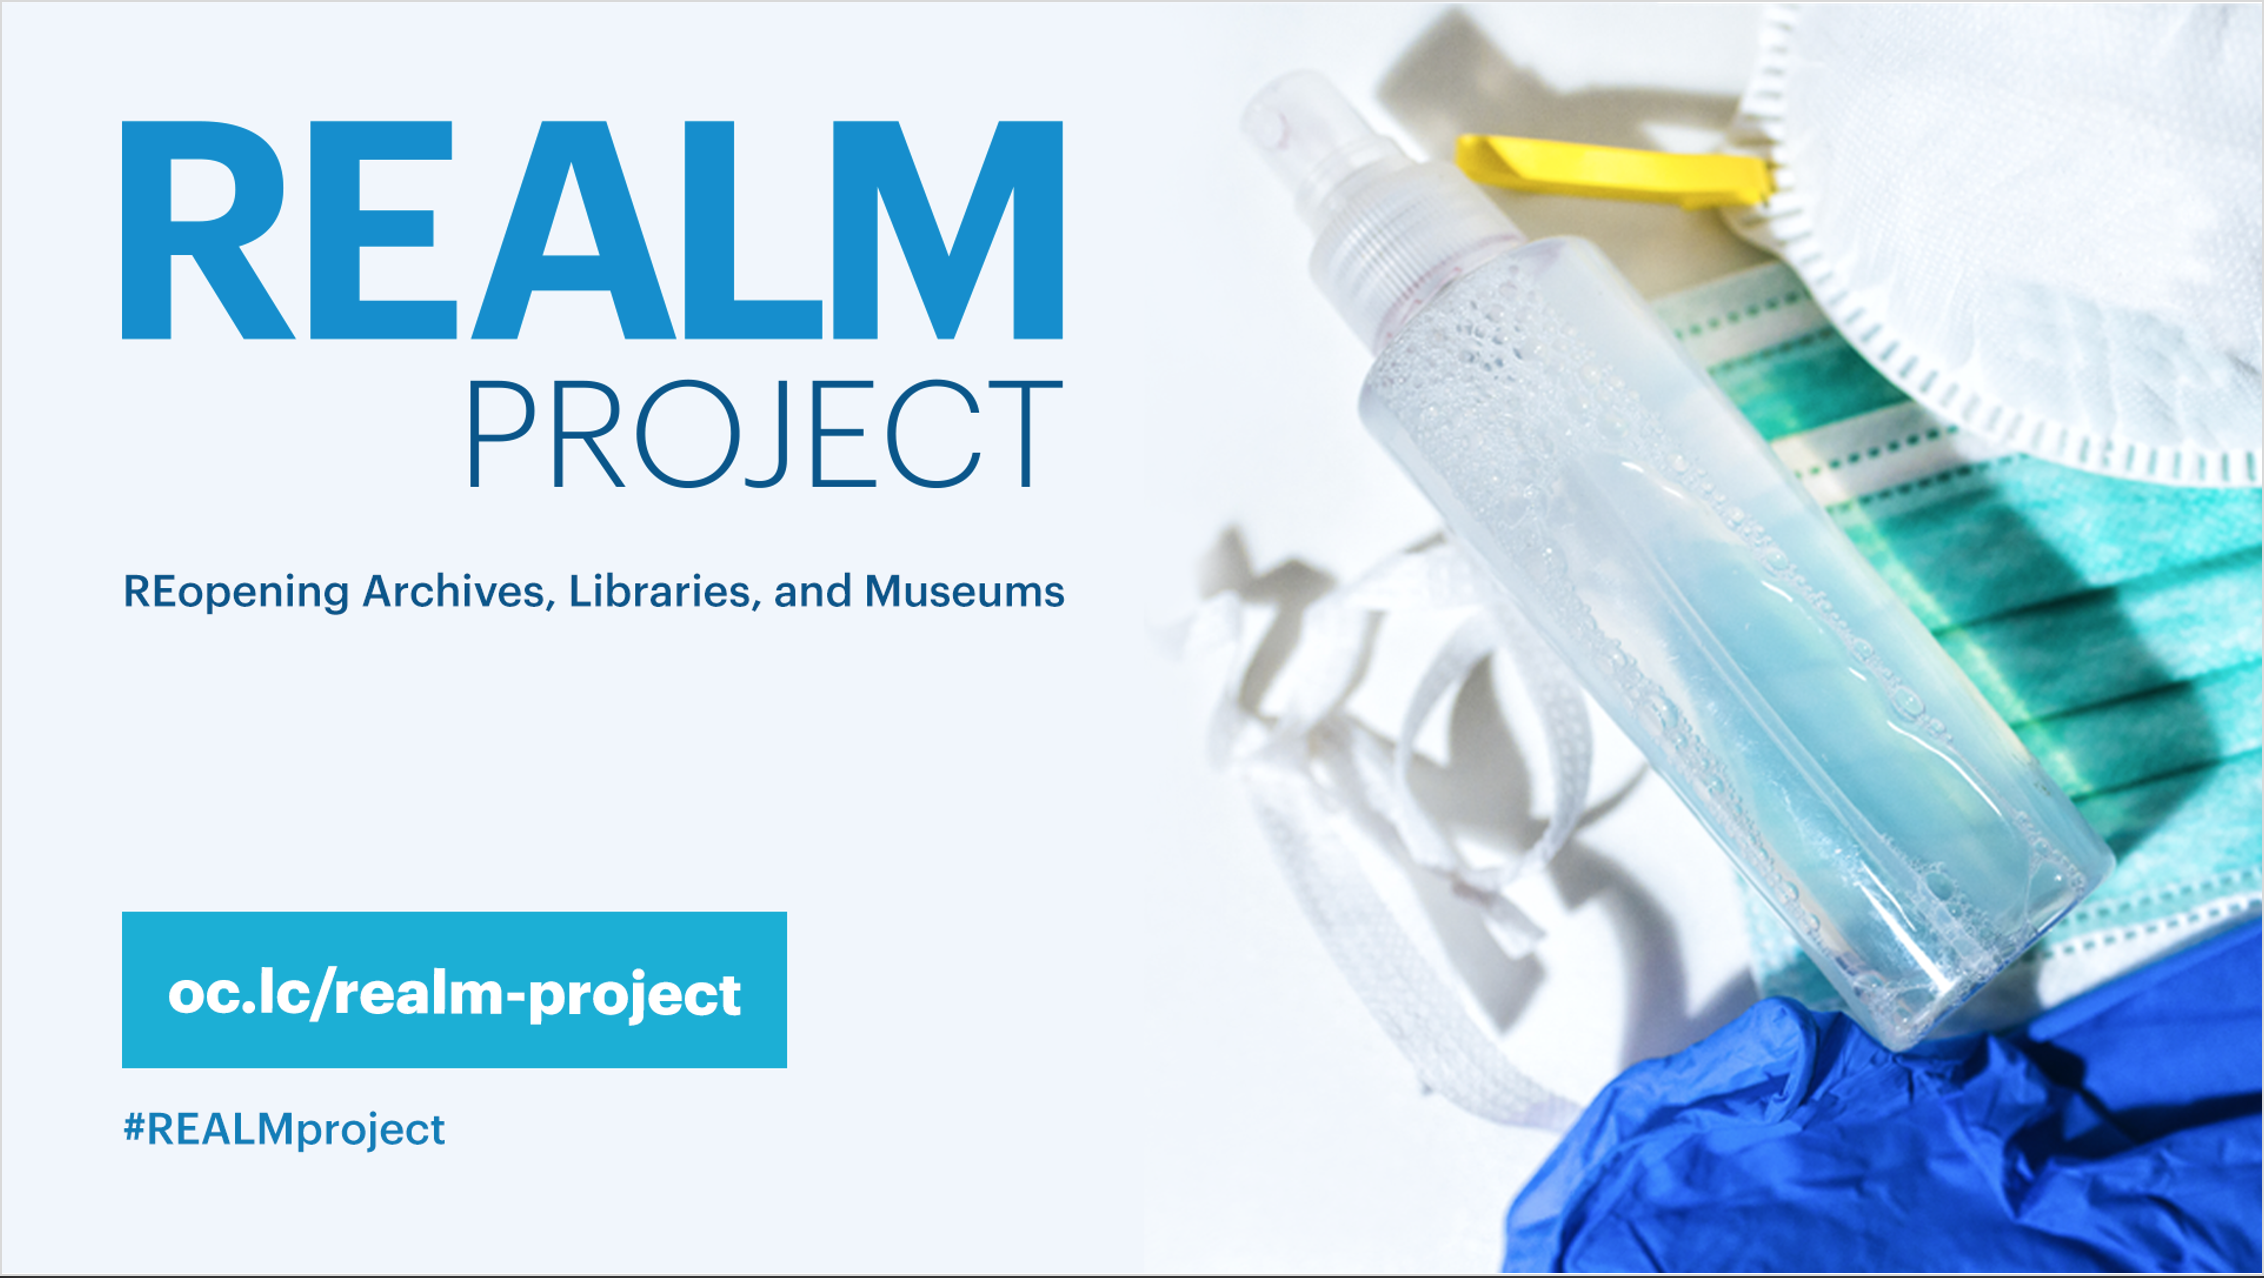 REALM project: Supporting the reopening of libraries, archives, and museums